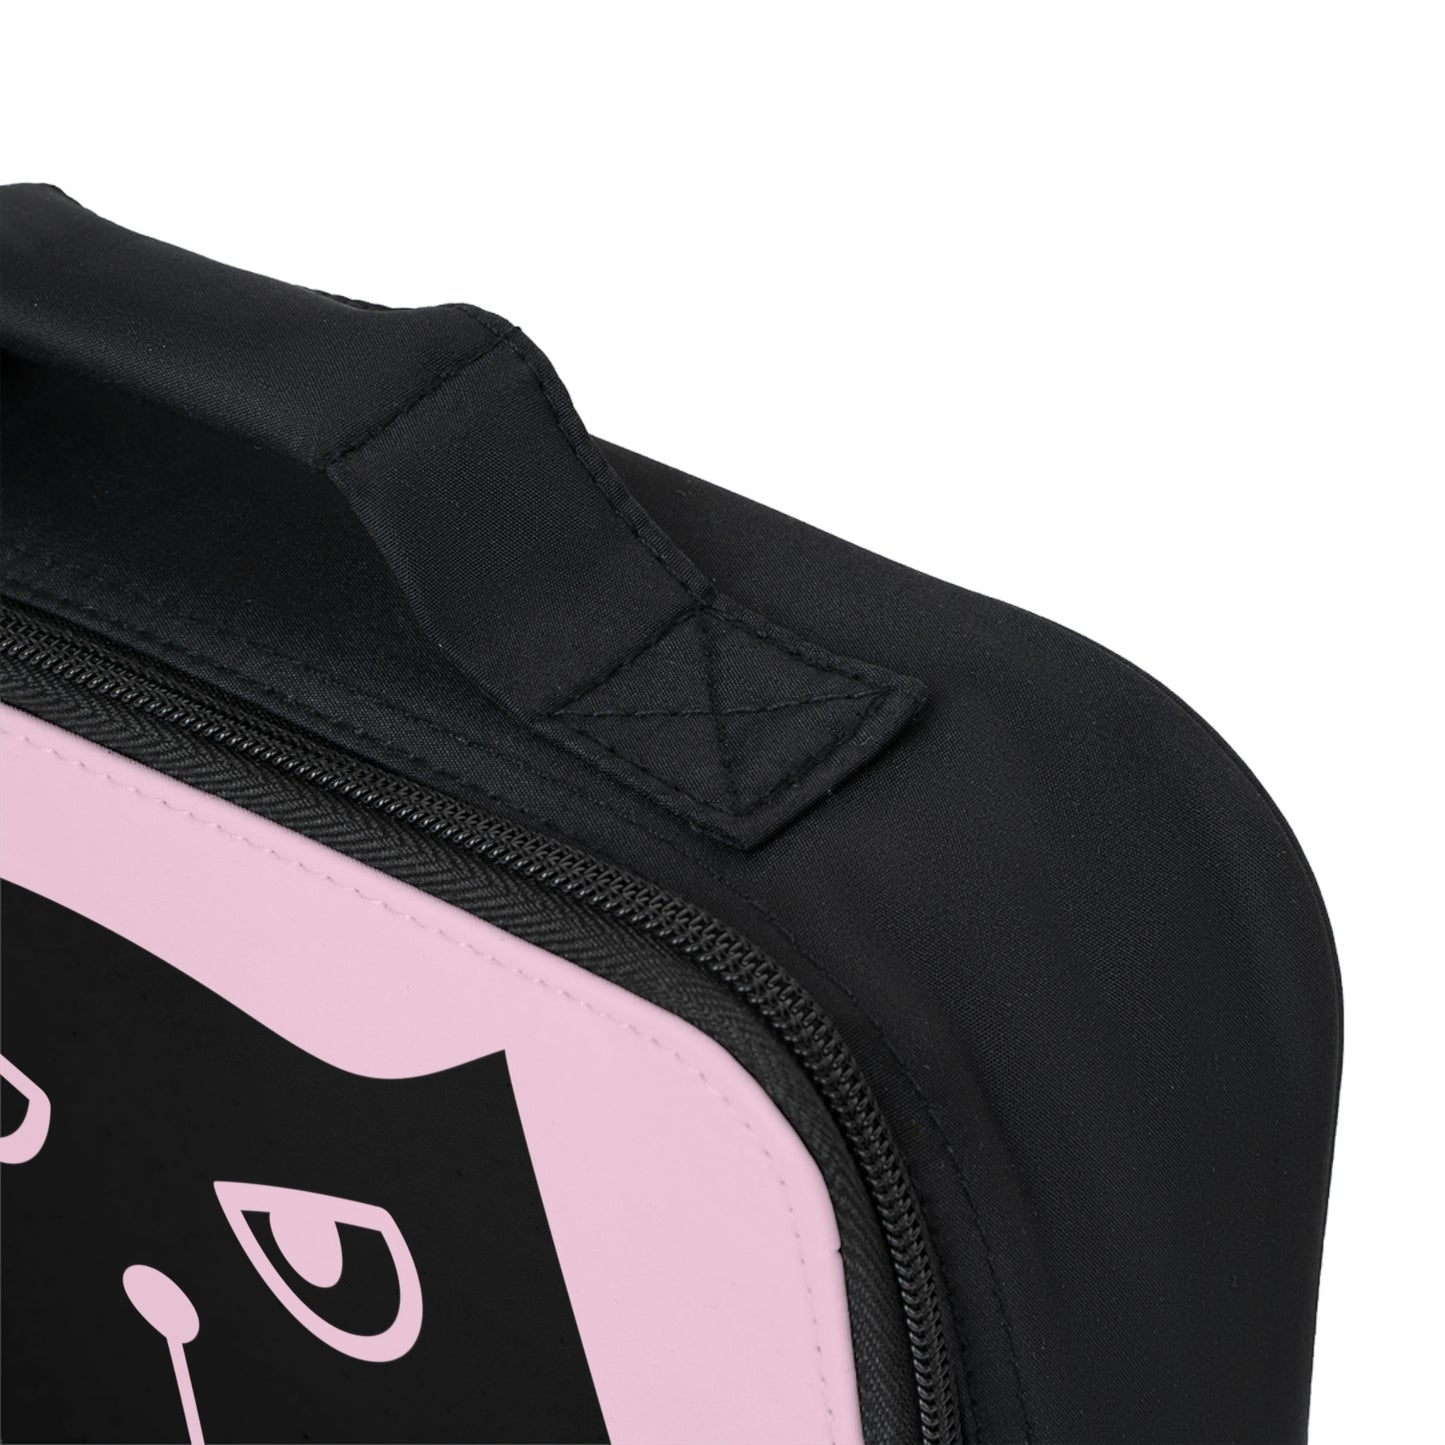 Black cat says "Pet if you can" pink Lunch Bag